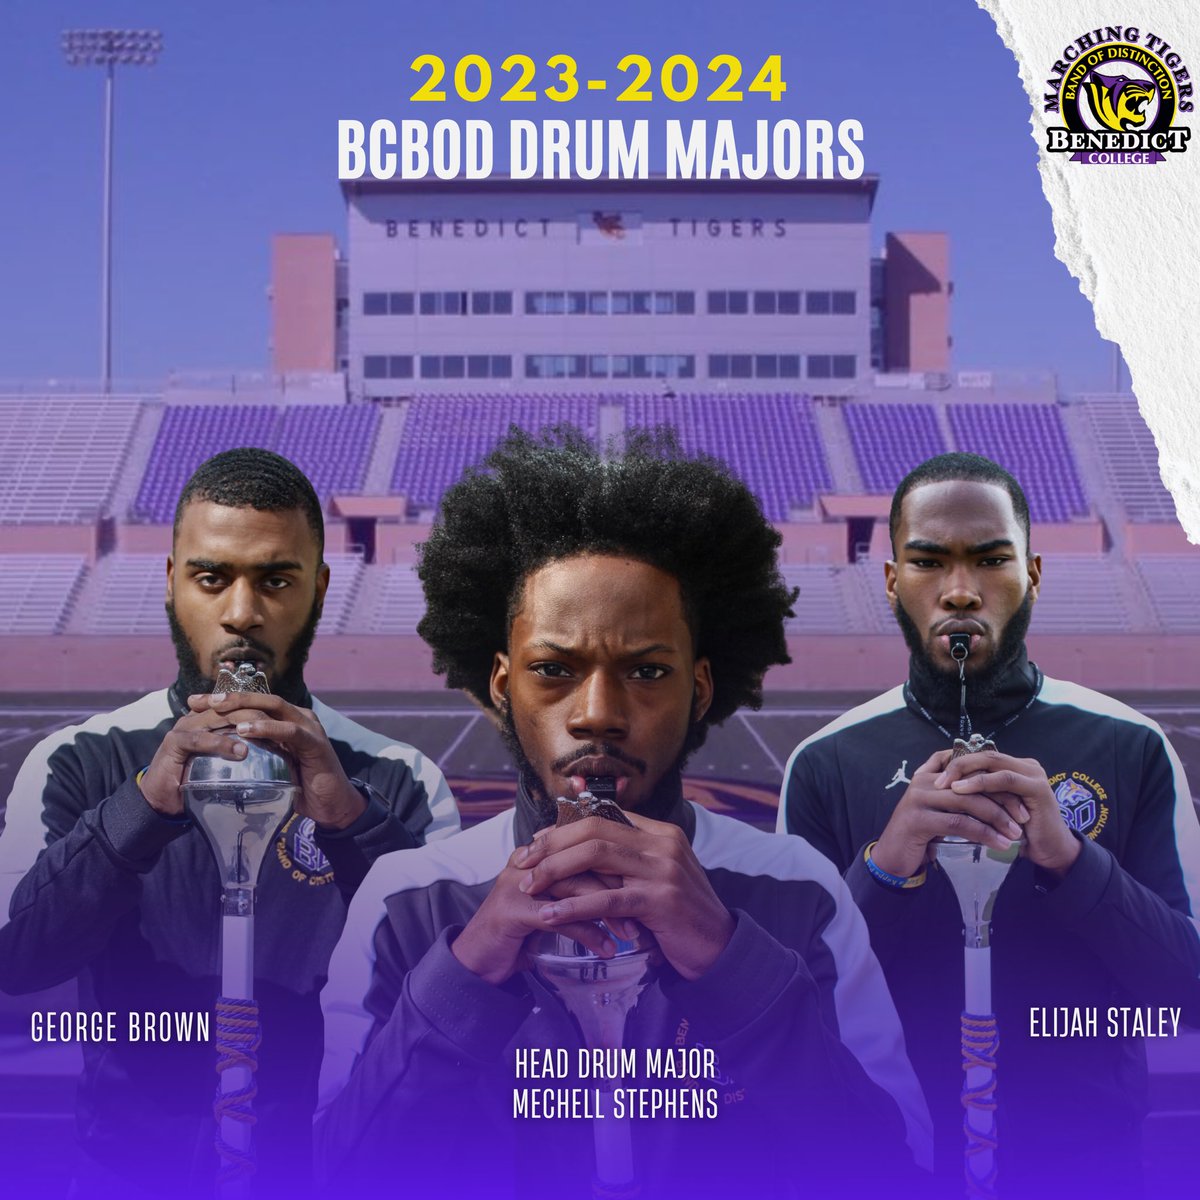 Benedict College Band of Distinction (@BC_BOD) on Twitter photo 2023-04-28 19:34:53